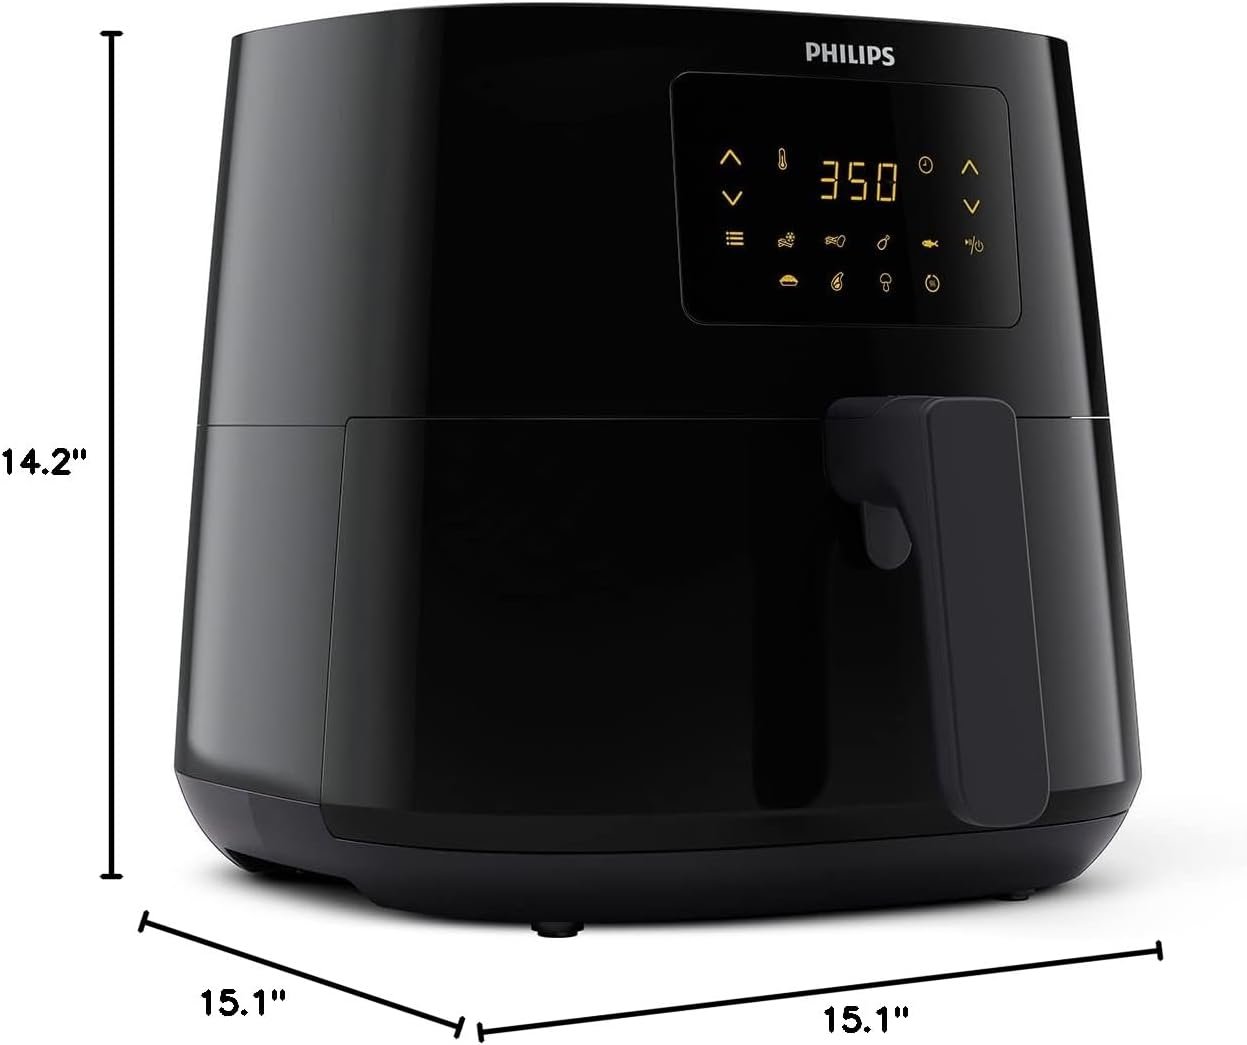 Philips Essential Airfryer XL 2.65lb/6.2L Capacity Digital Airfryer with Rapid Air Technology, Starfish Design, Easy Clean Basket, Black, (HD9270/91)